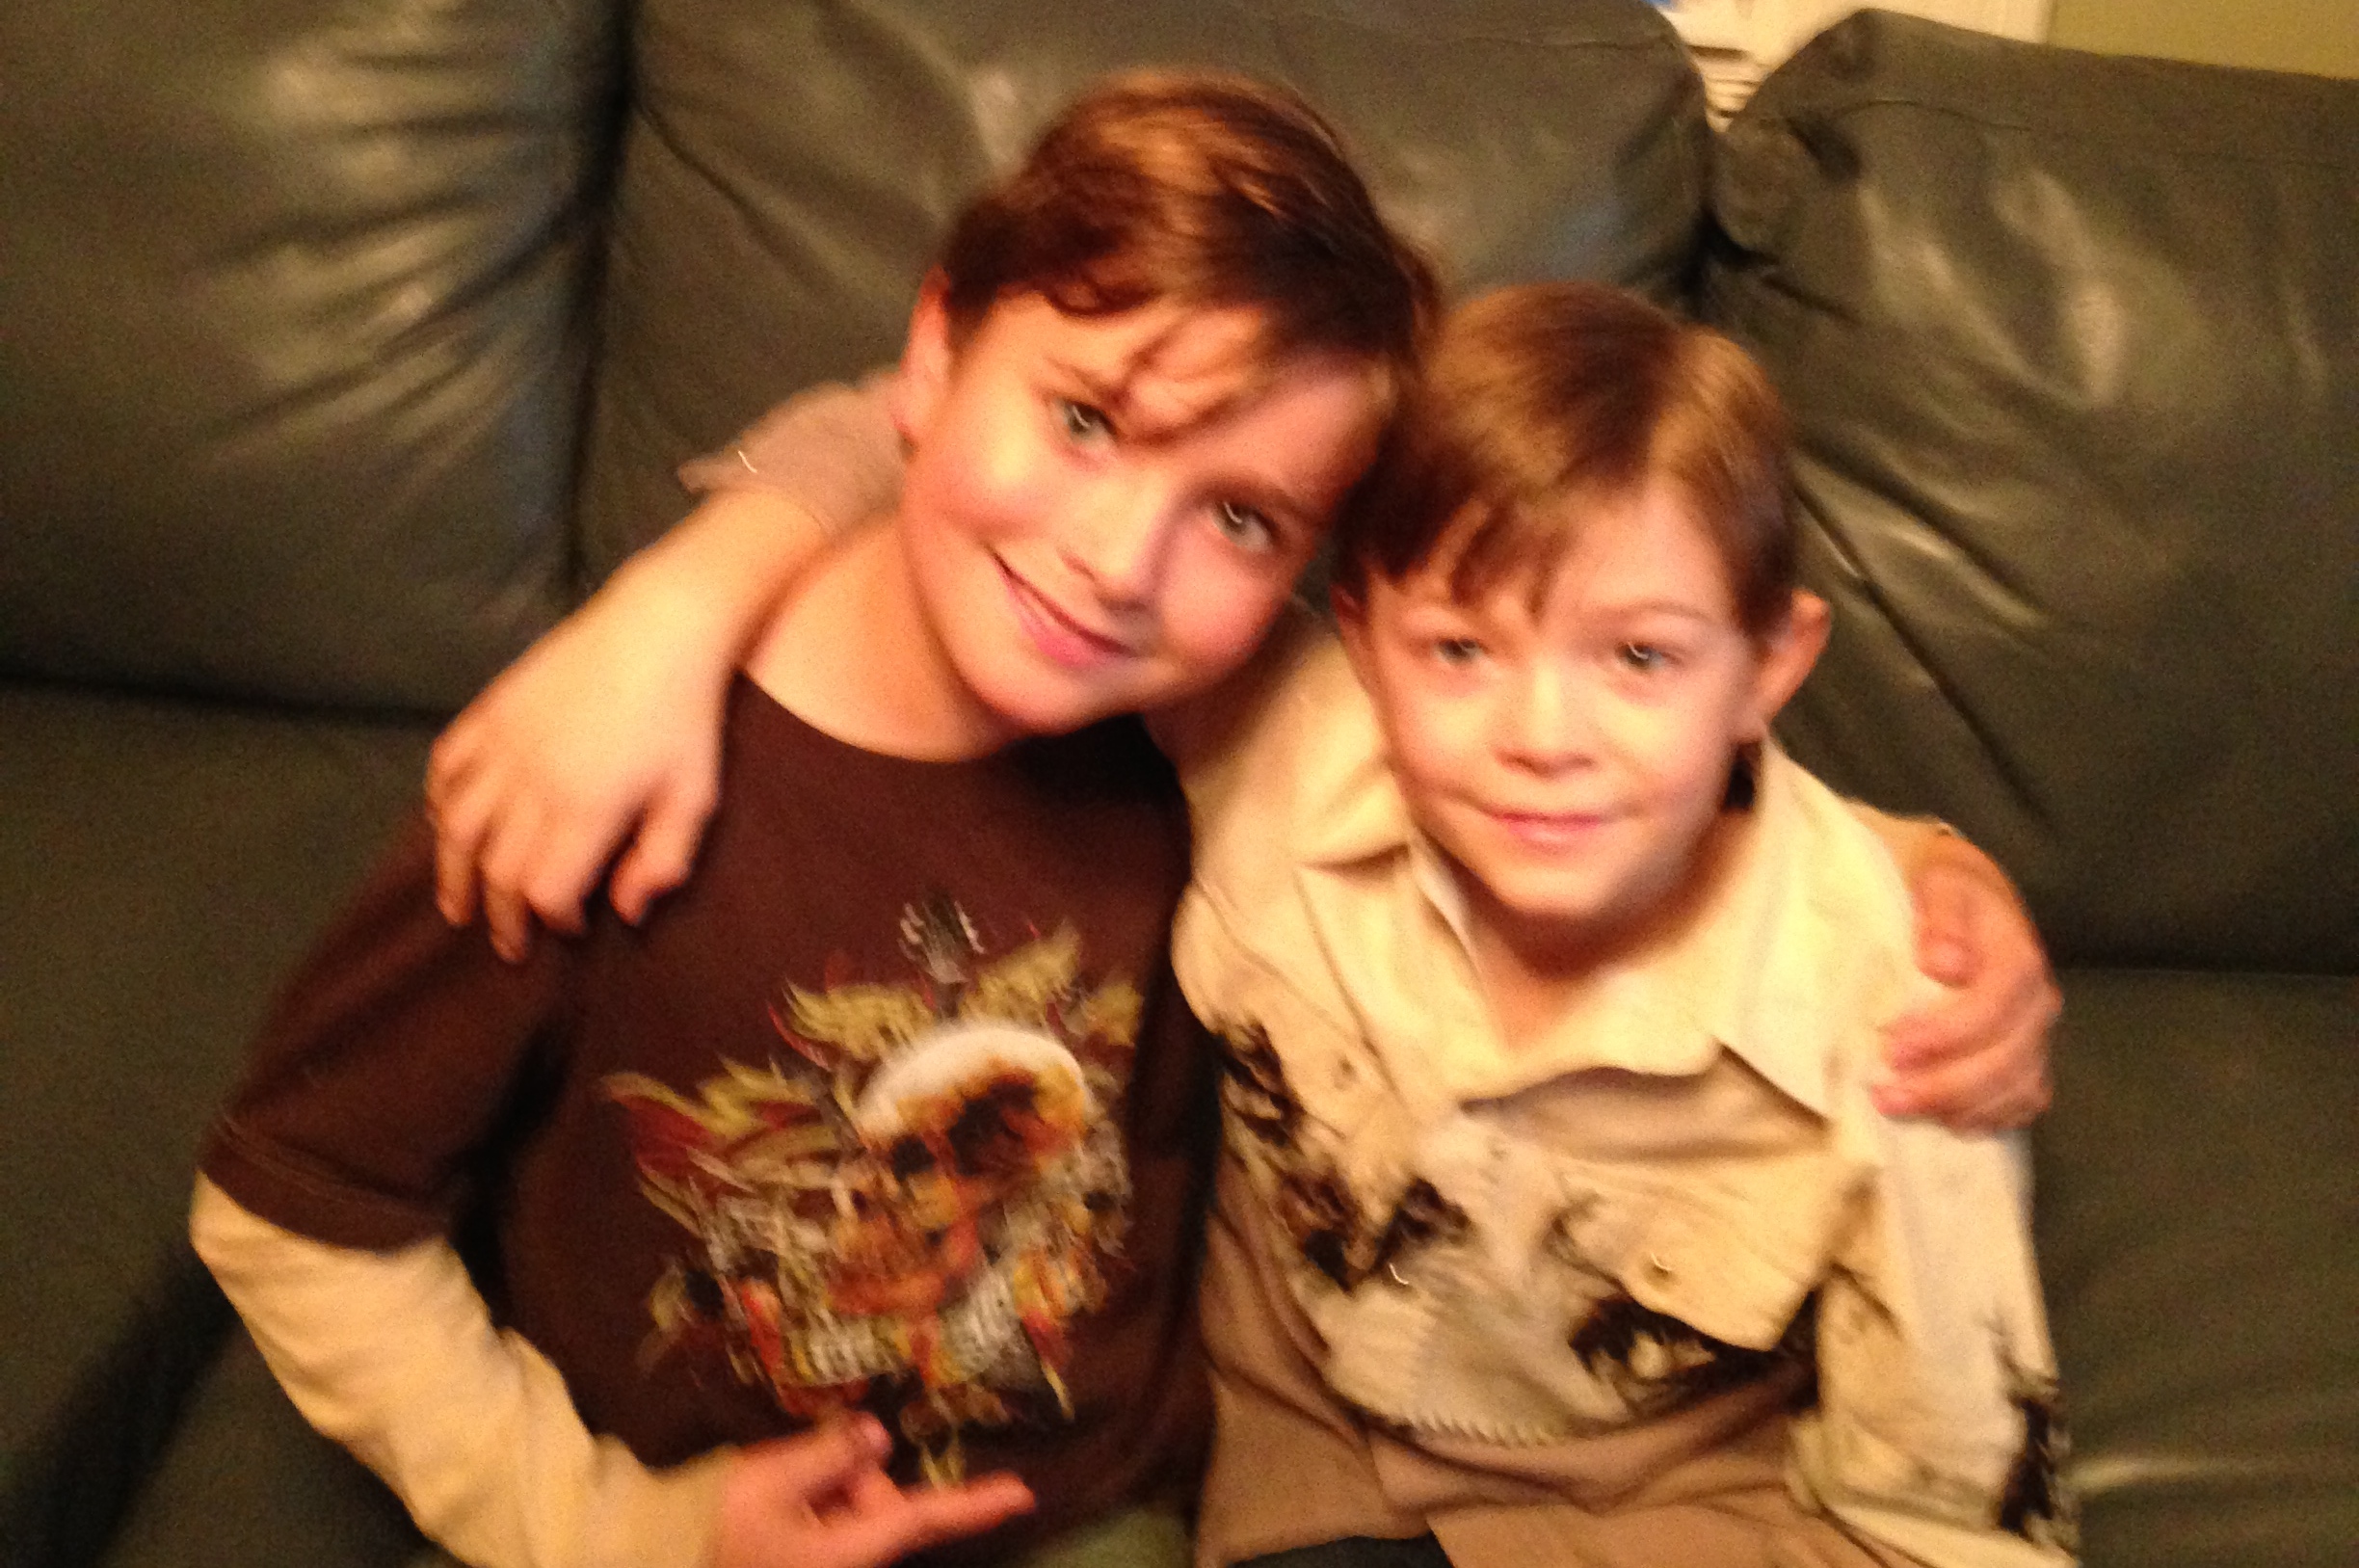 Alex and Oakes Fegley ( currently filming Disney's Pete's Dragon remake with Robert Redford) during the run of Joel's Grey's play, On Borrowed Time.